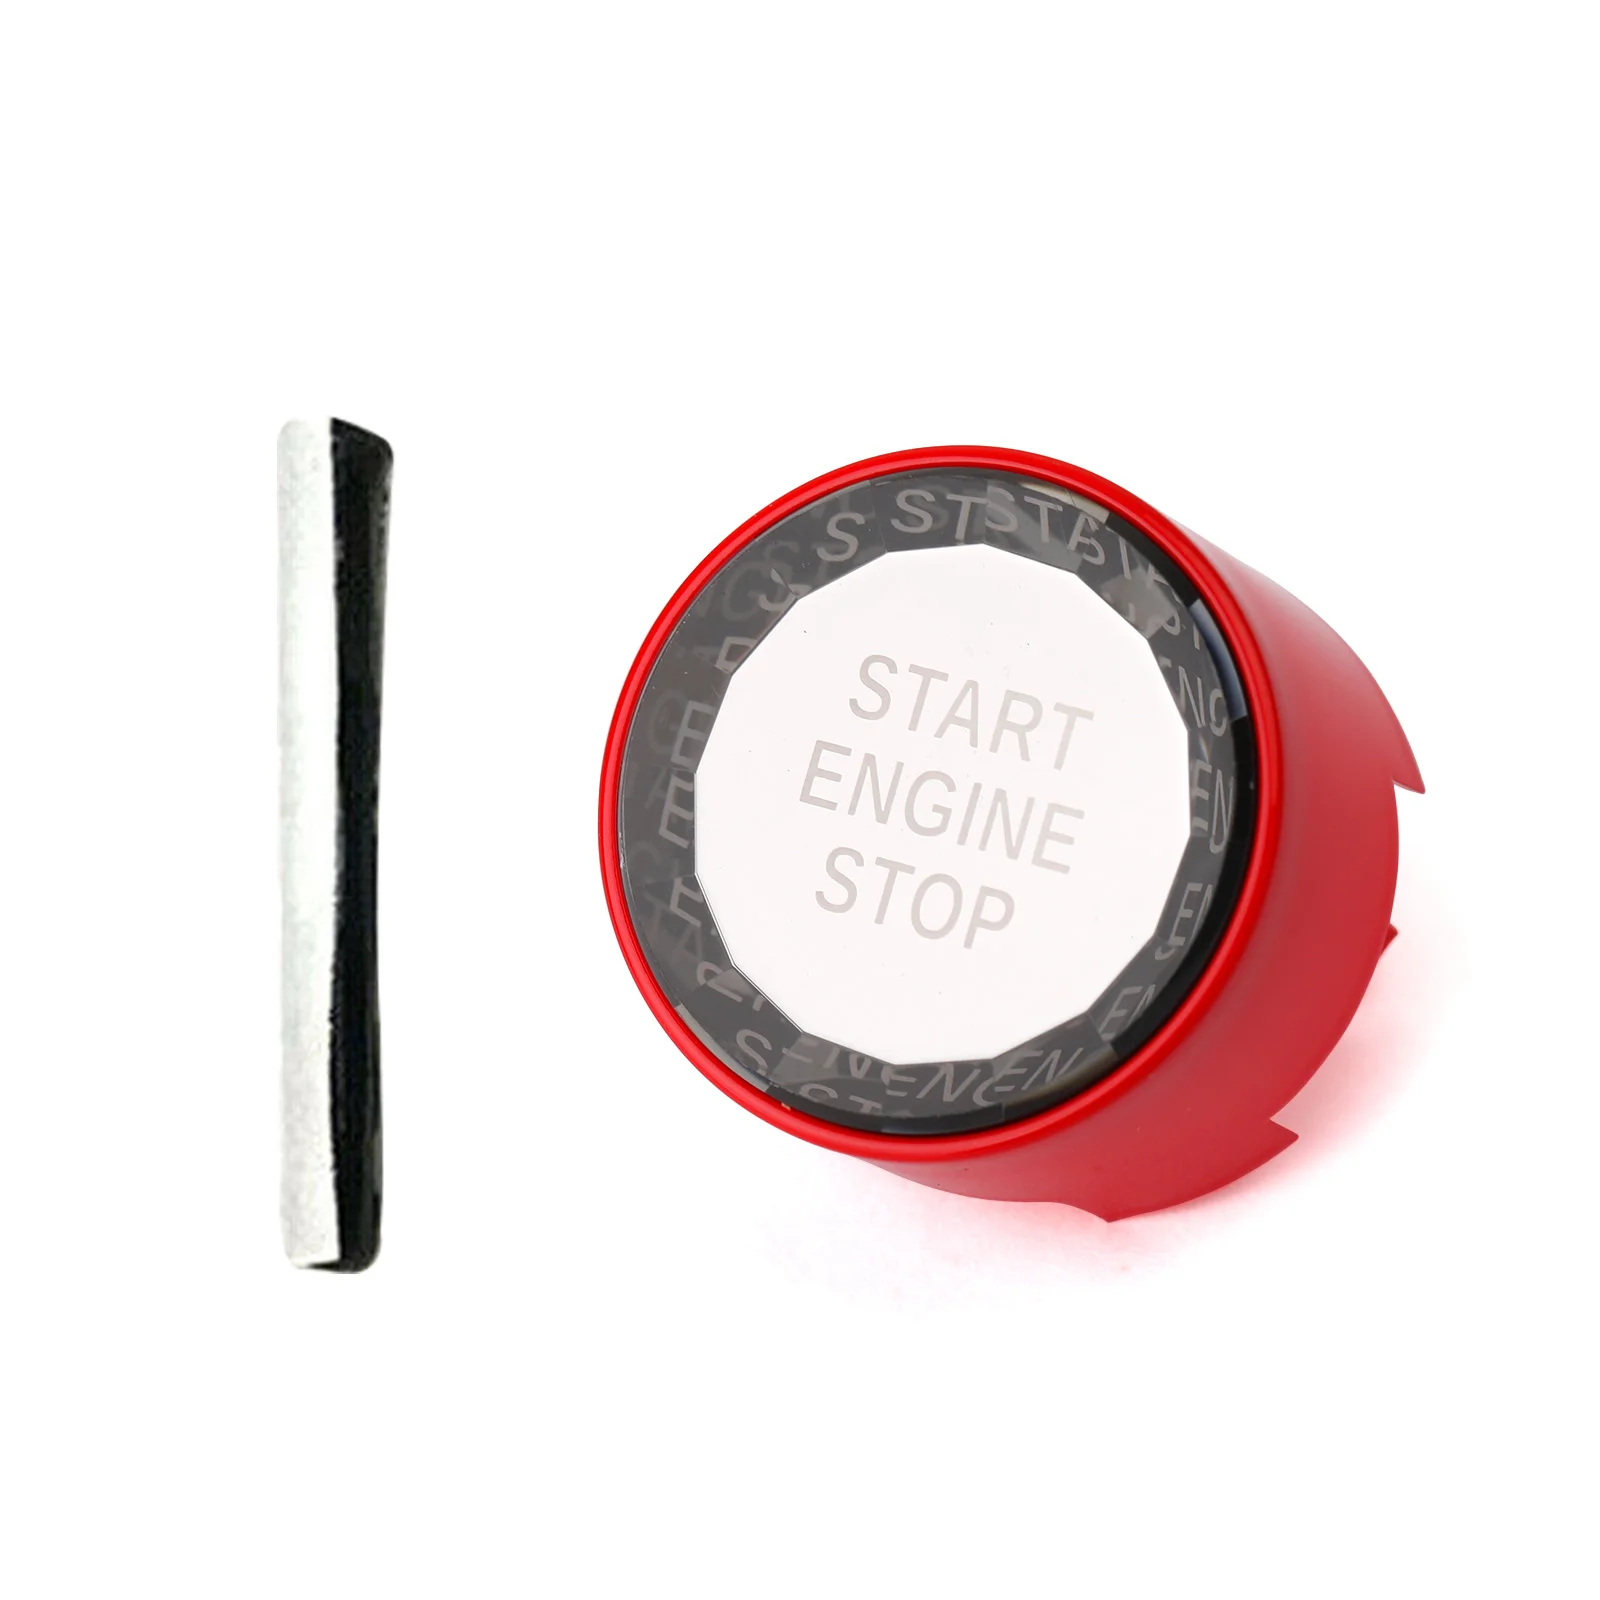 

Areyourshop Red Engine Start Stop Switch Button Cover OFF For BMW F Chassis F30 F10 Crystal, As the picture shows